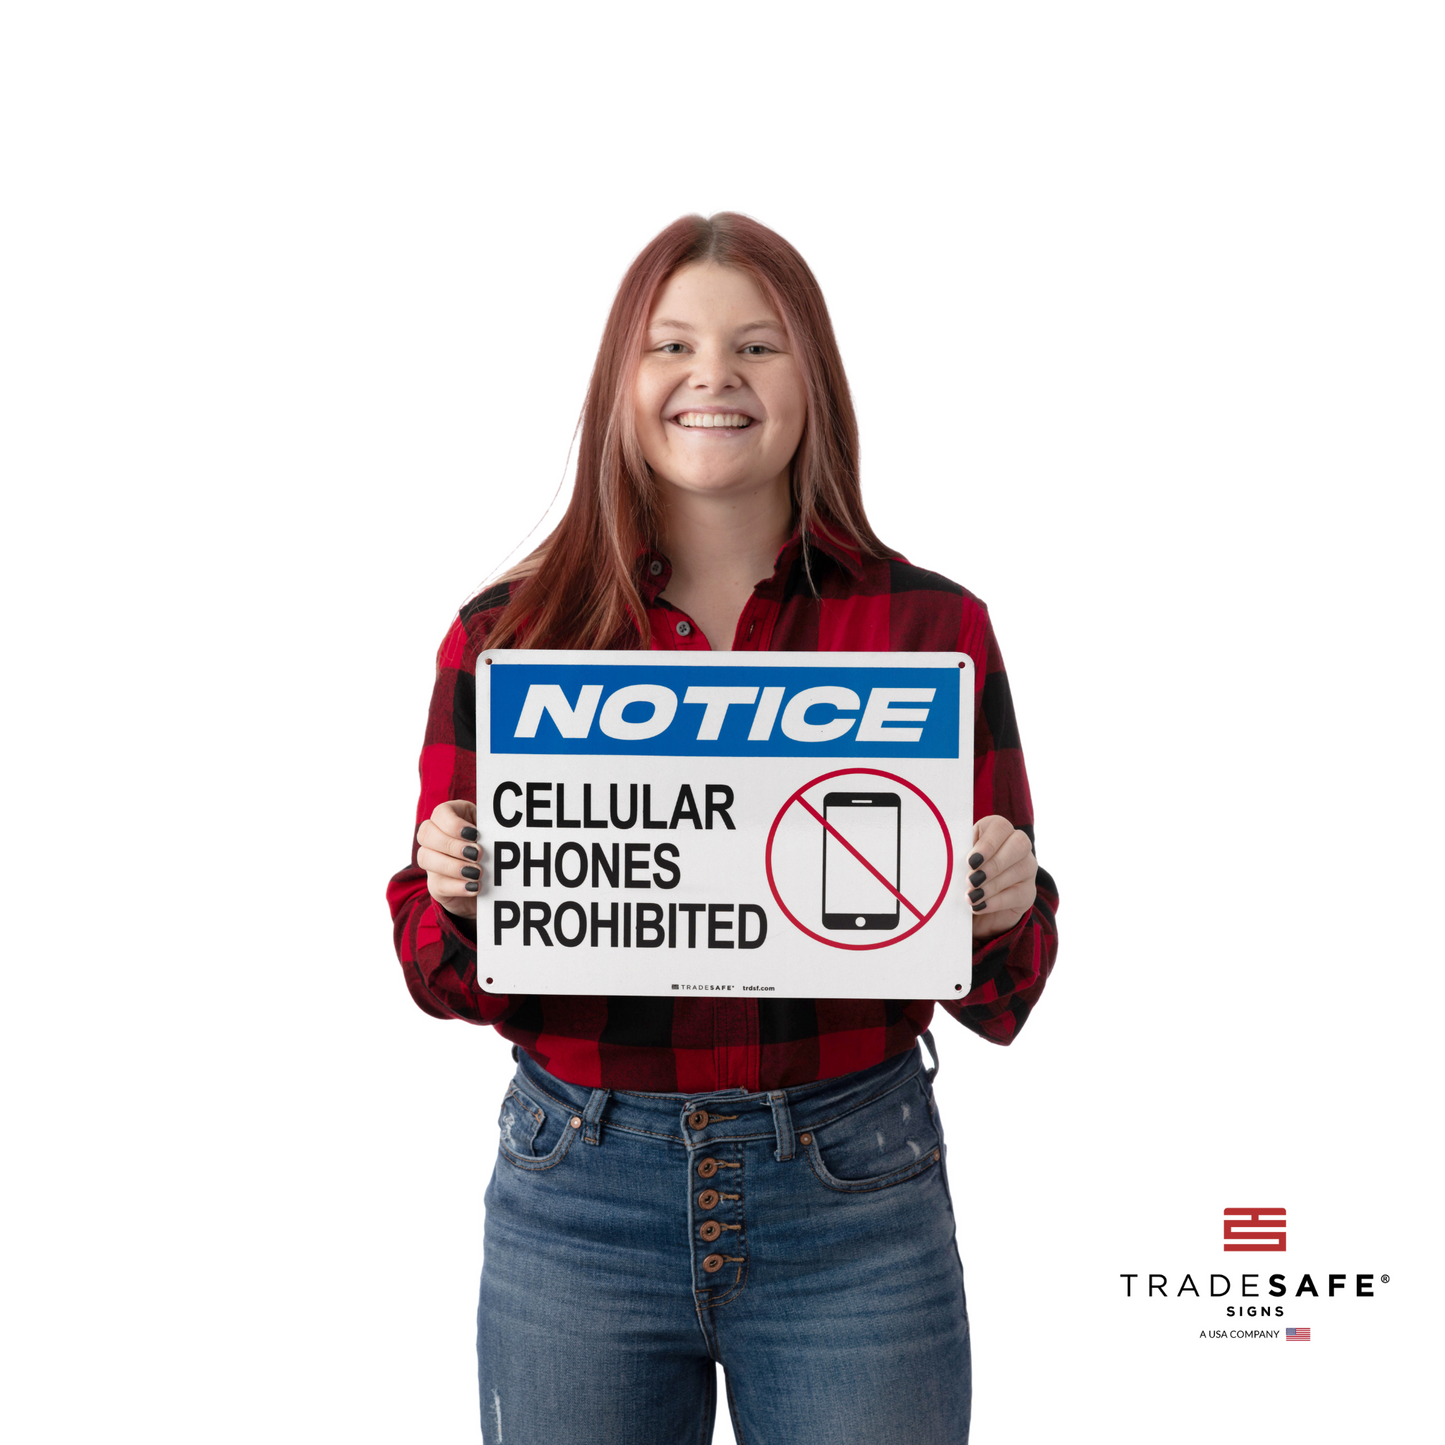 a person holding "notice cellular phones prohibited" sign